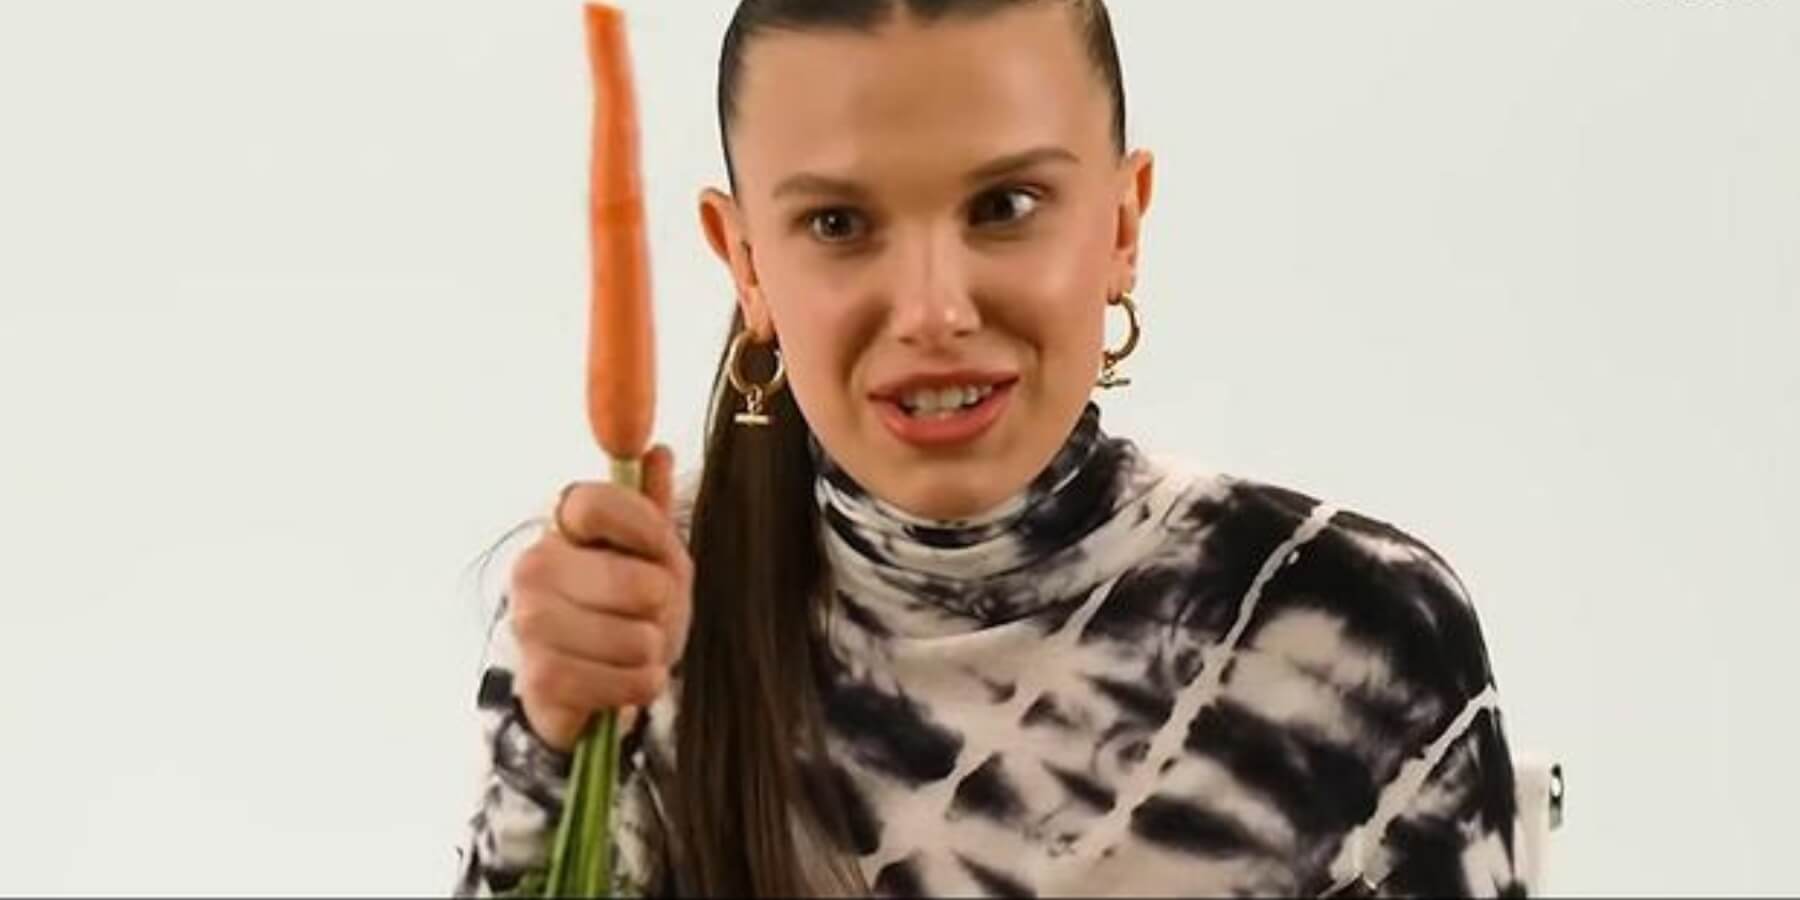 'Stranger Things' star Millie Bobby Brown loves to eat unwashed carrots as seen in a TikTok video.